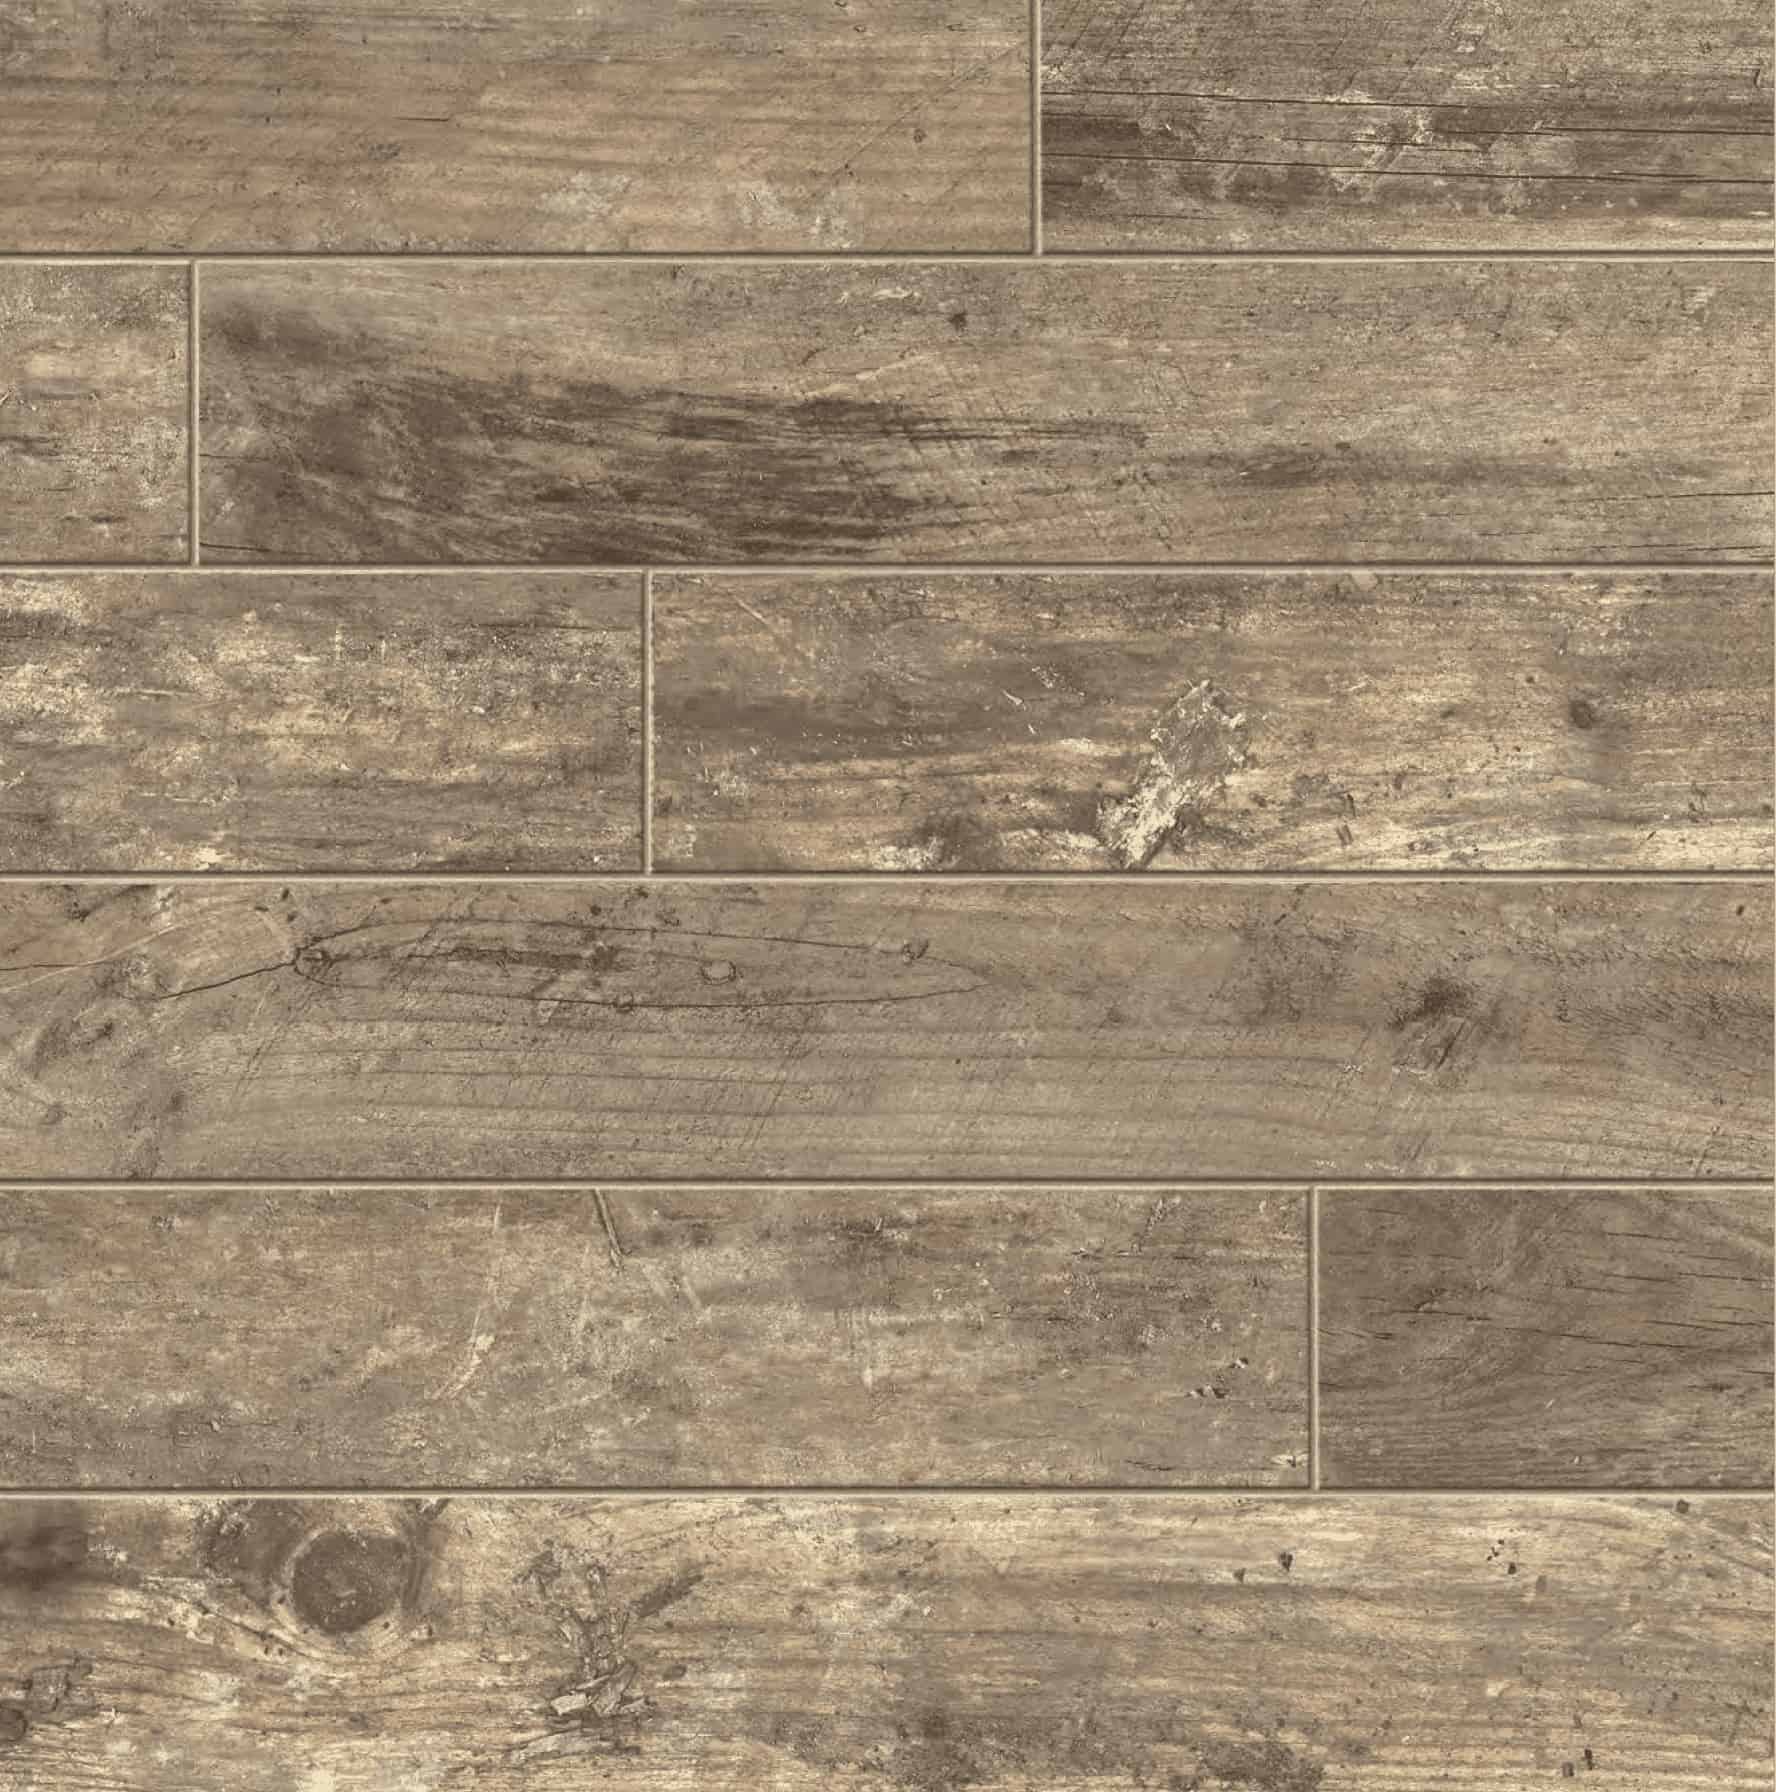 Wood-look Tile Flooring: How to Lay Tile professionally - Blog RUBI